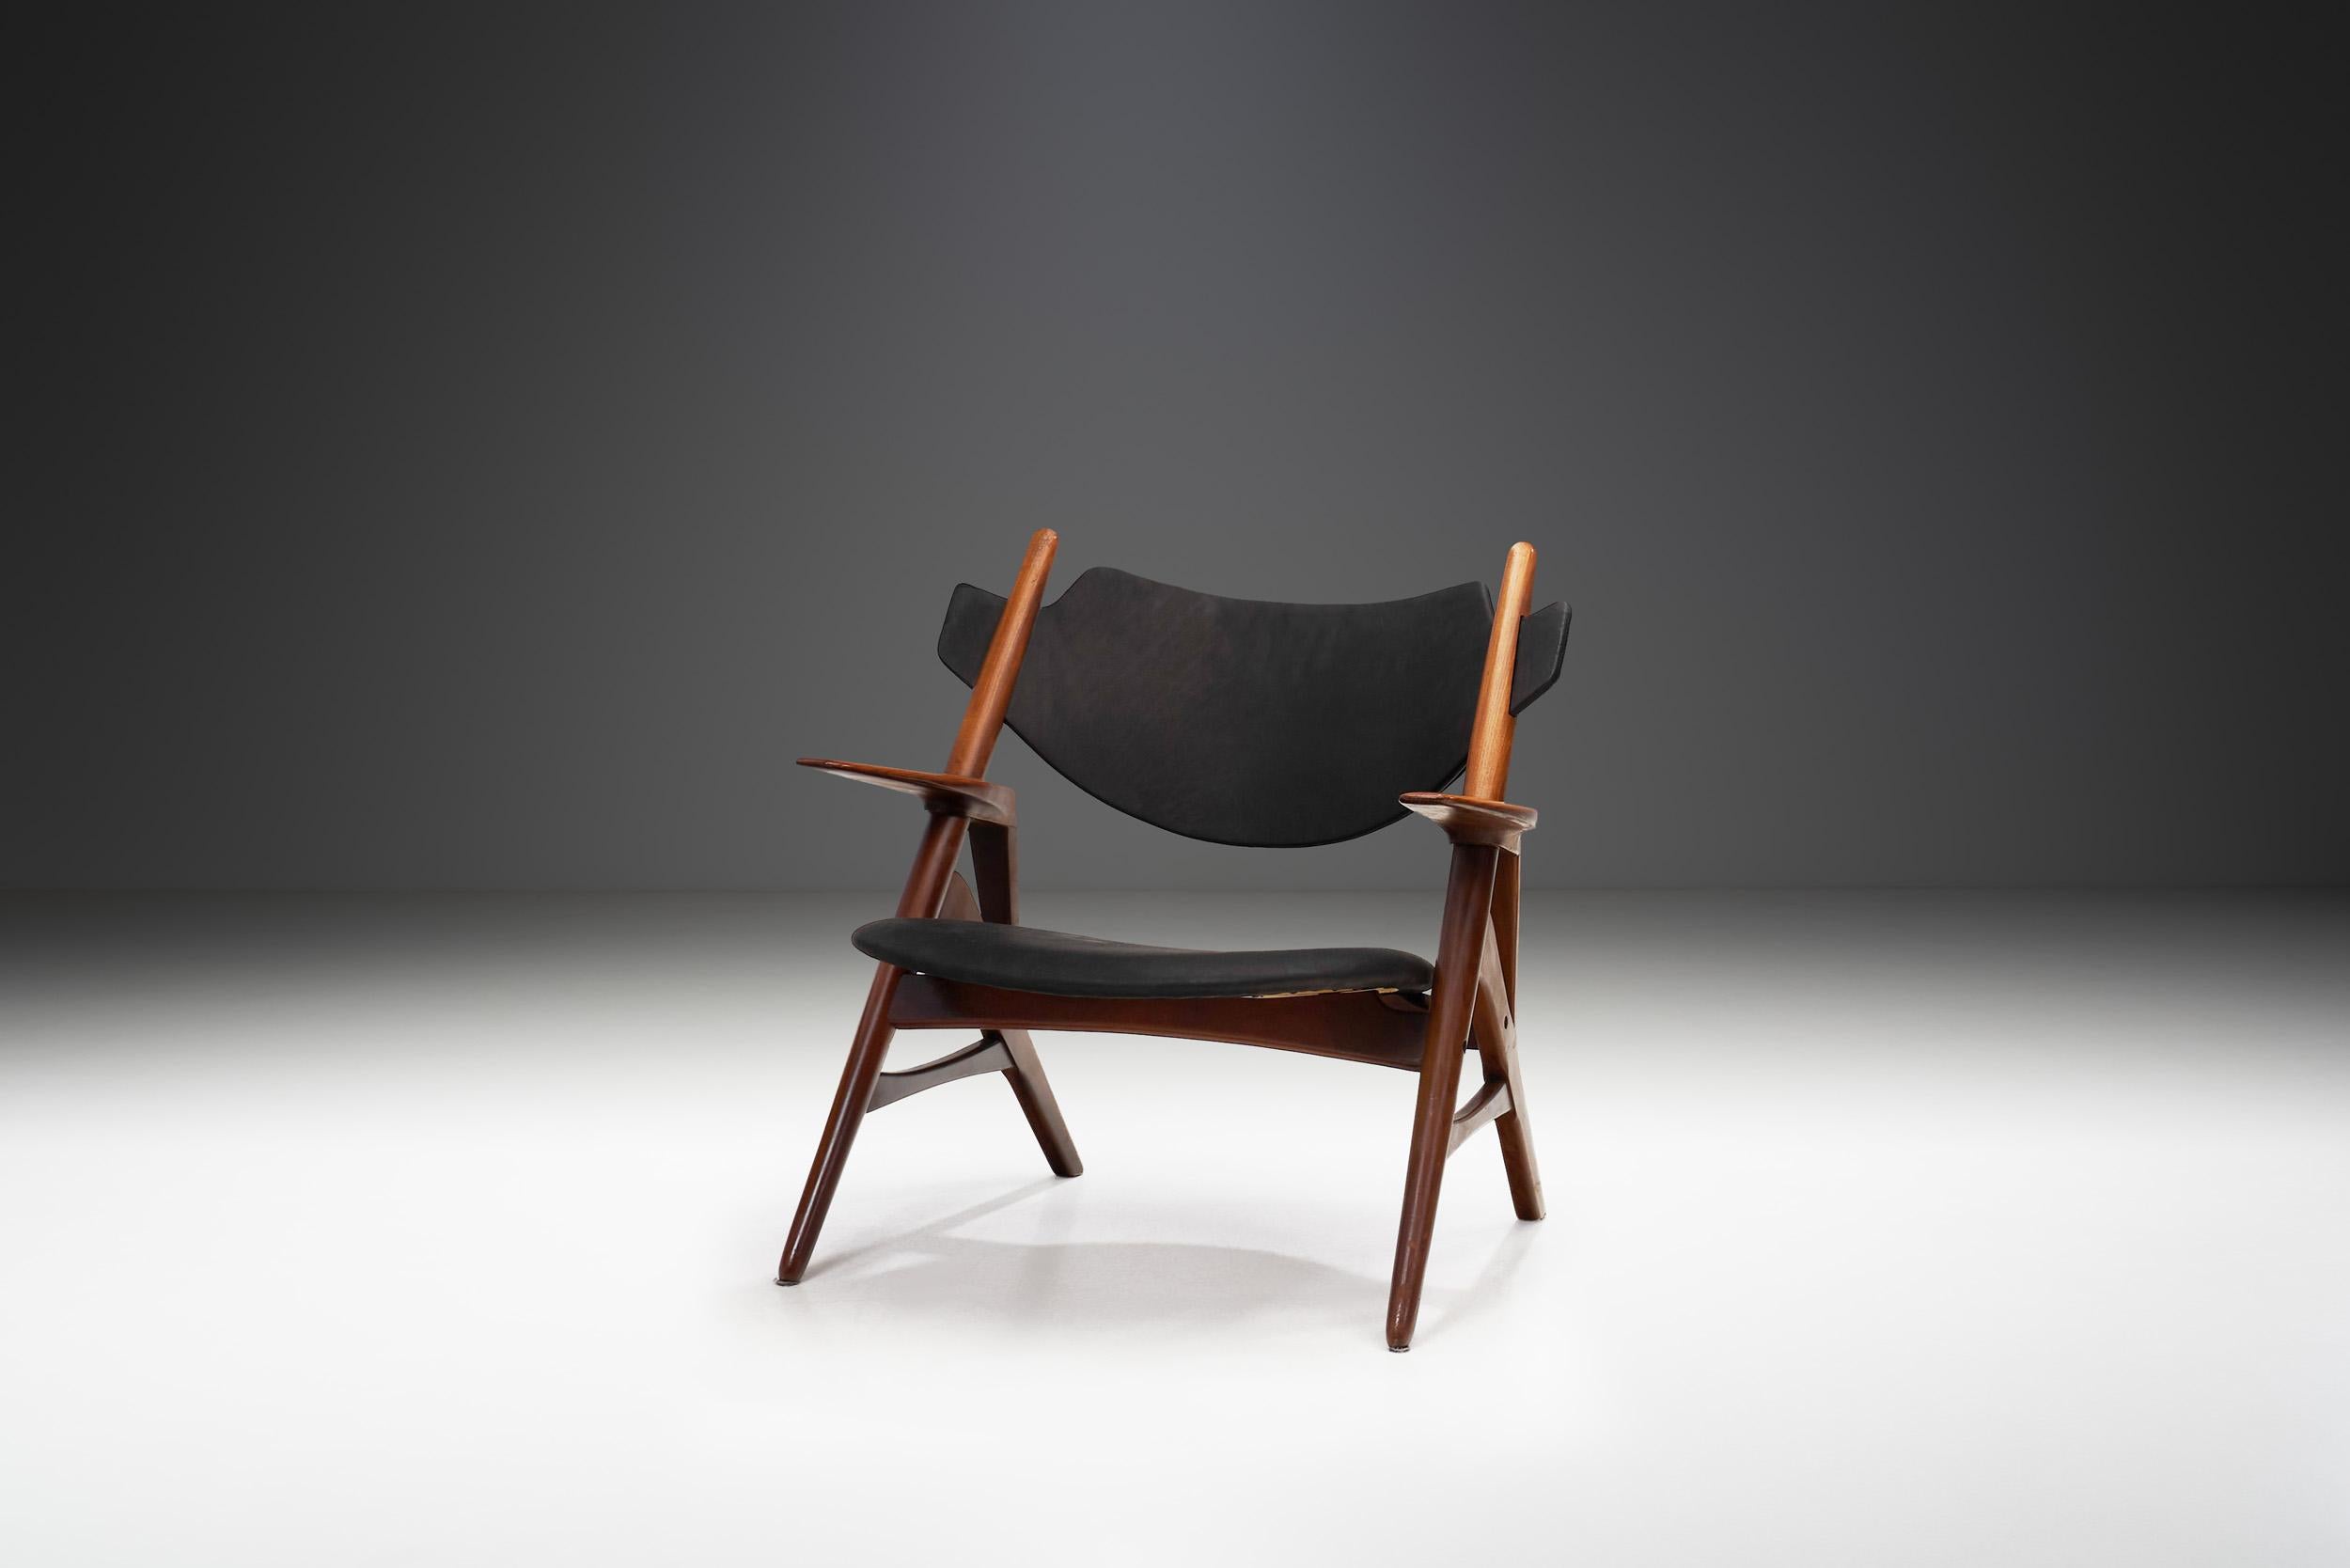 Danish Modern designers are the undisputed masters of mid-century modern chair design. As this chair shows, their furniture generally united form and function; in every design, they placed the highest demands on comfort and ergonomics. To Danish